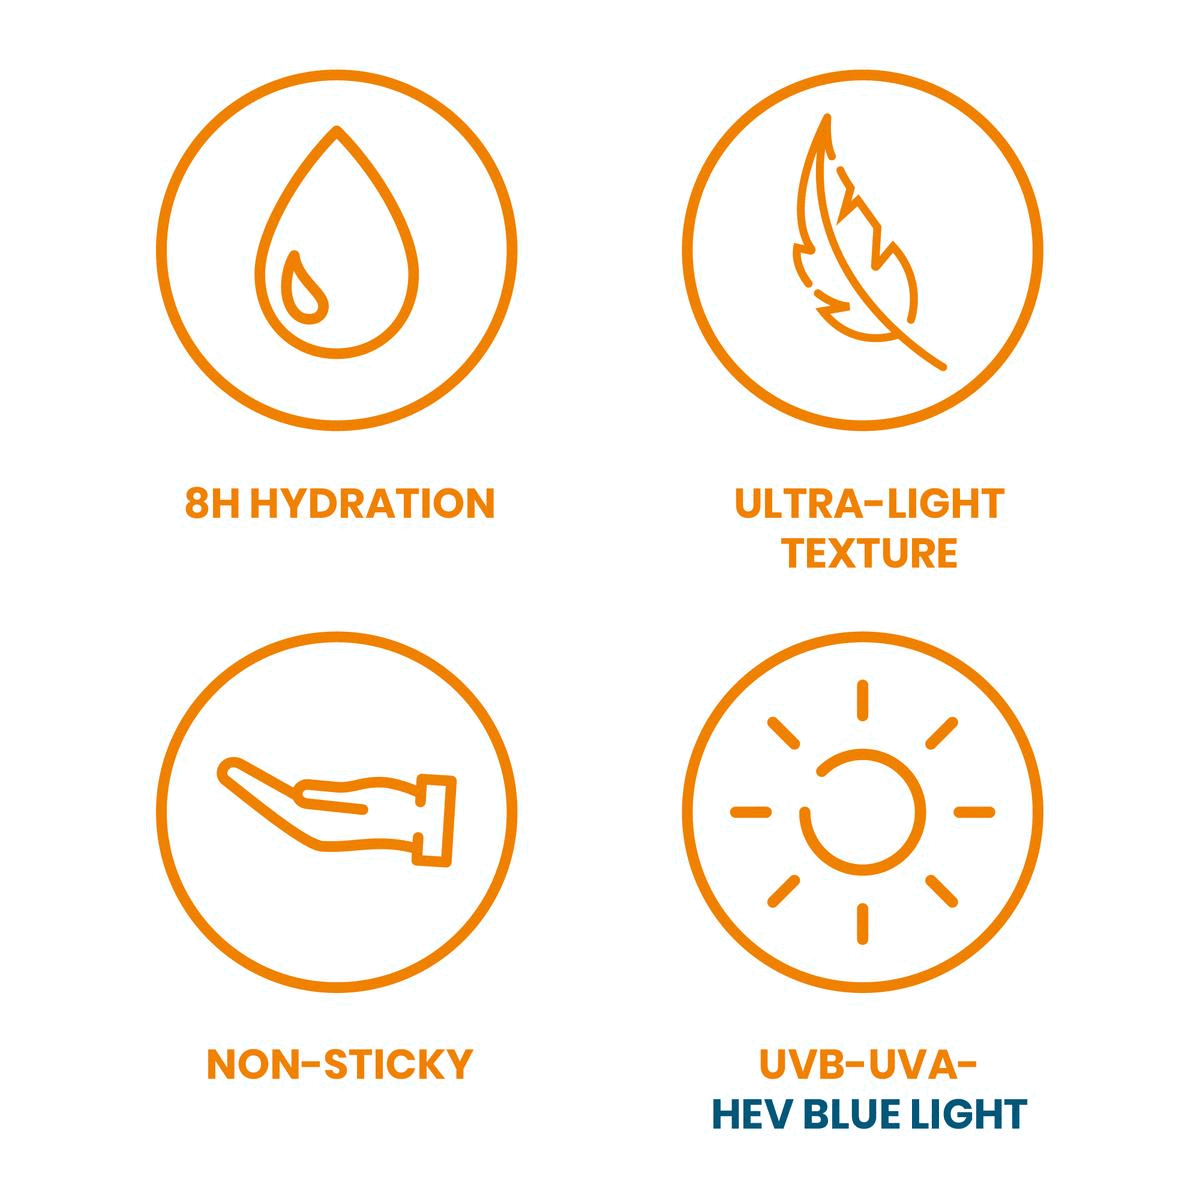 Image 1, 8 hour hydration, velvety texture, non-sticky, UVB_UVA HEV Blue Light. Image 2, Sun Fact - Blue light from the sun can be harmful for the skin, it can accelerate skin ageing and hyperpigmentation. Image 3, product benefits. Image 4, Swatch image with ingredients. Image 5, the range. Image 6, new packaging